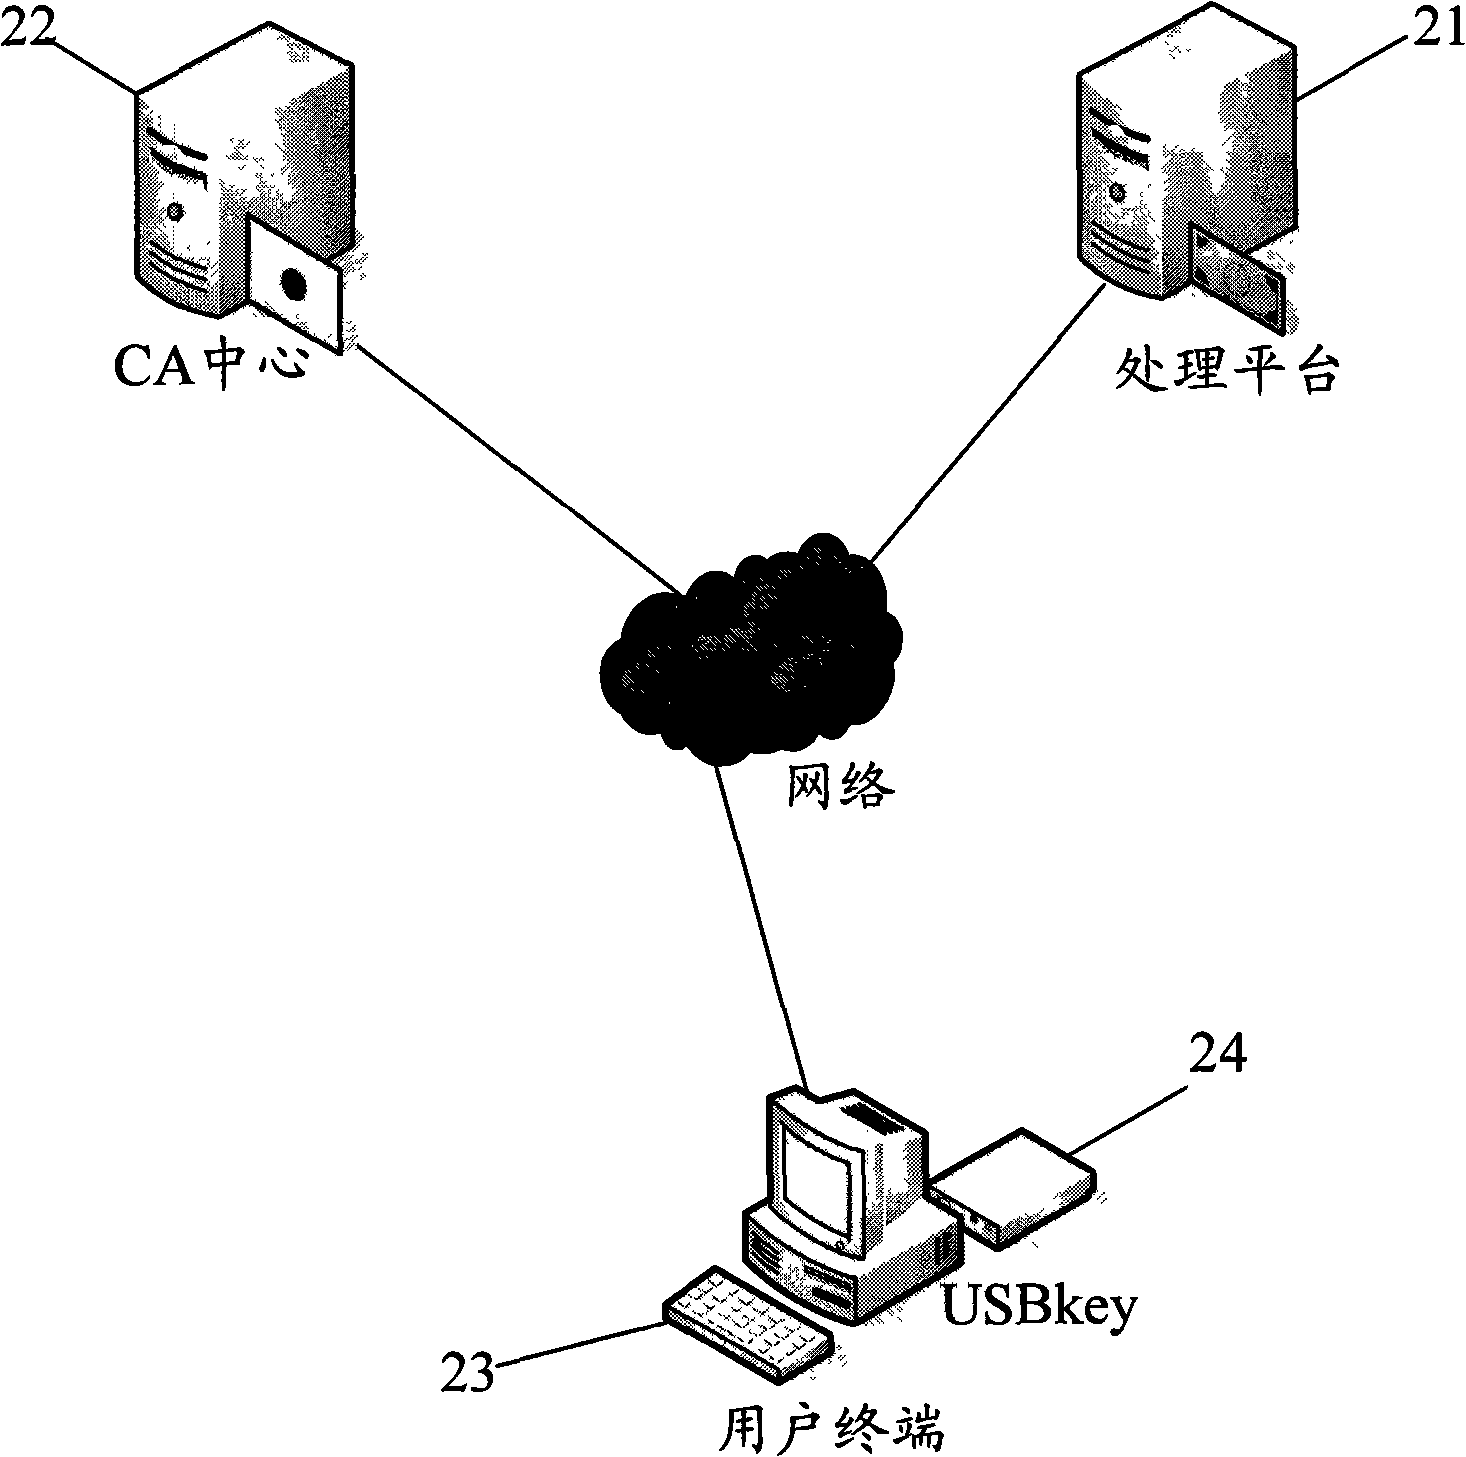 Method and system for identity authentication by finger print USBkey